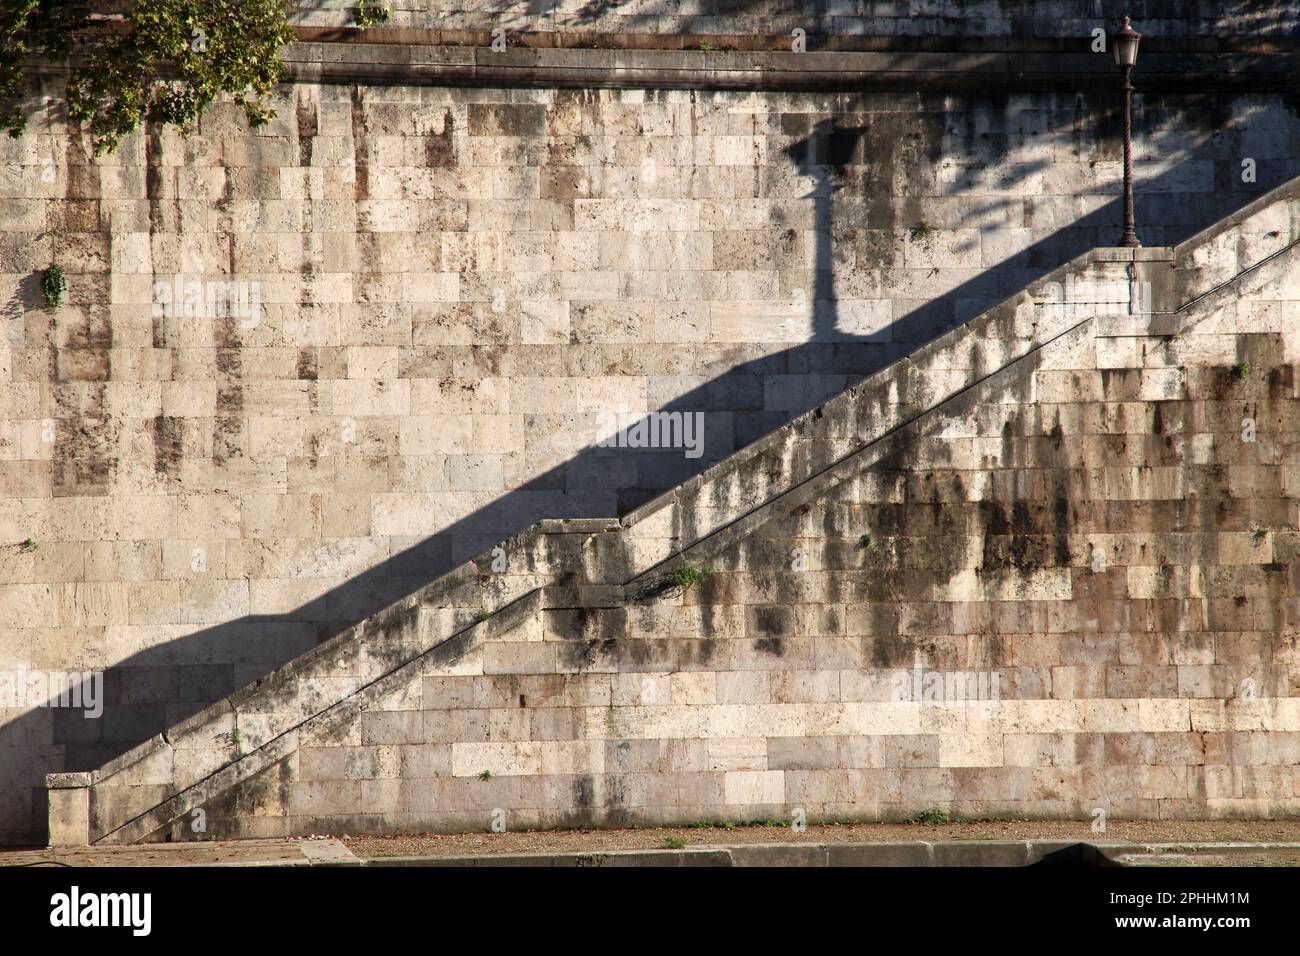 Roman cityscape with shadows and parapets, Lungotevere, Roma, Italy Stock Photo